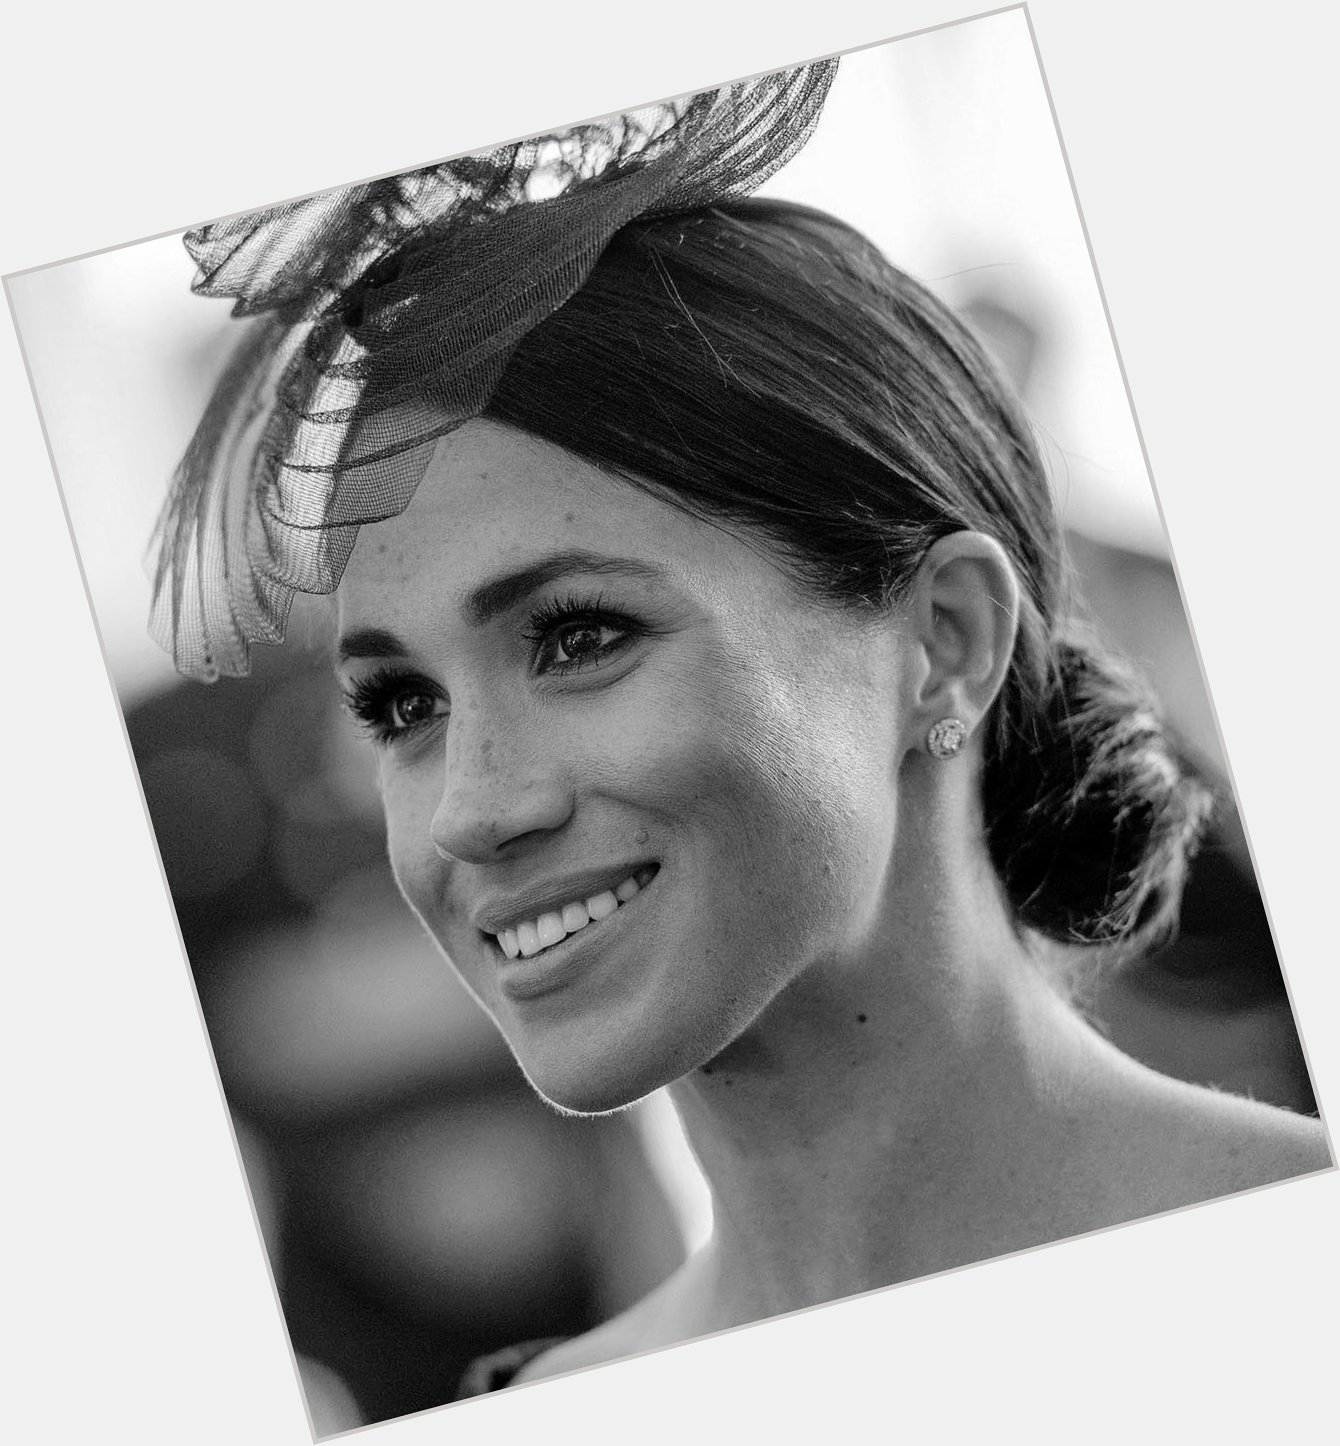 One of my absolute favourite human beings and such an incredible and admirable woman. Happy Birthday Meghan Markle 